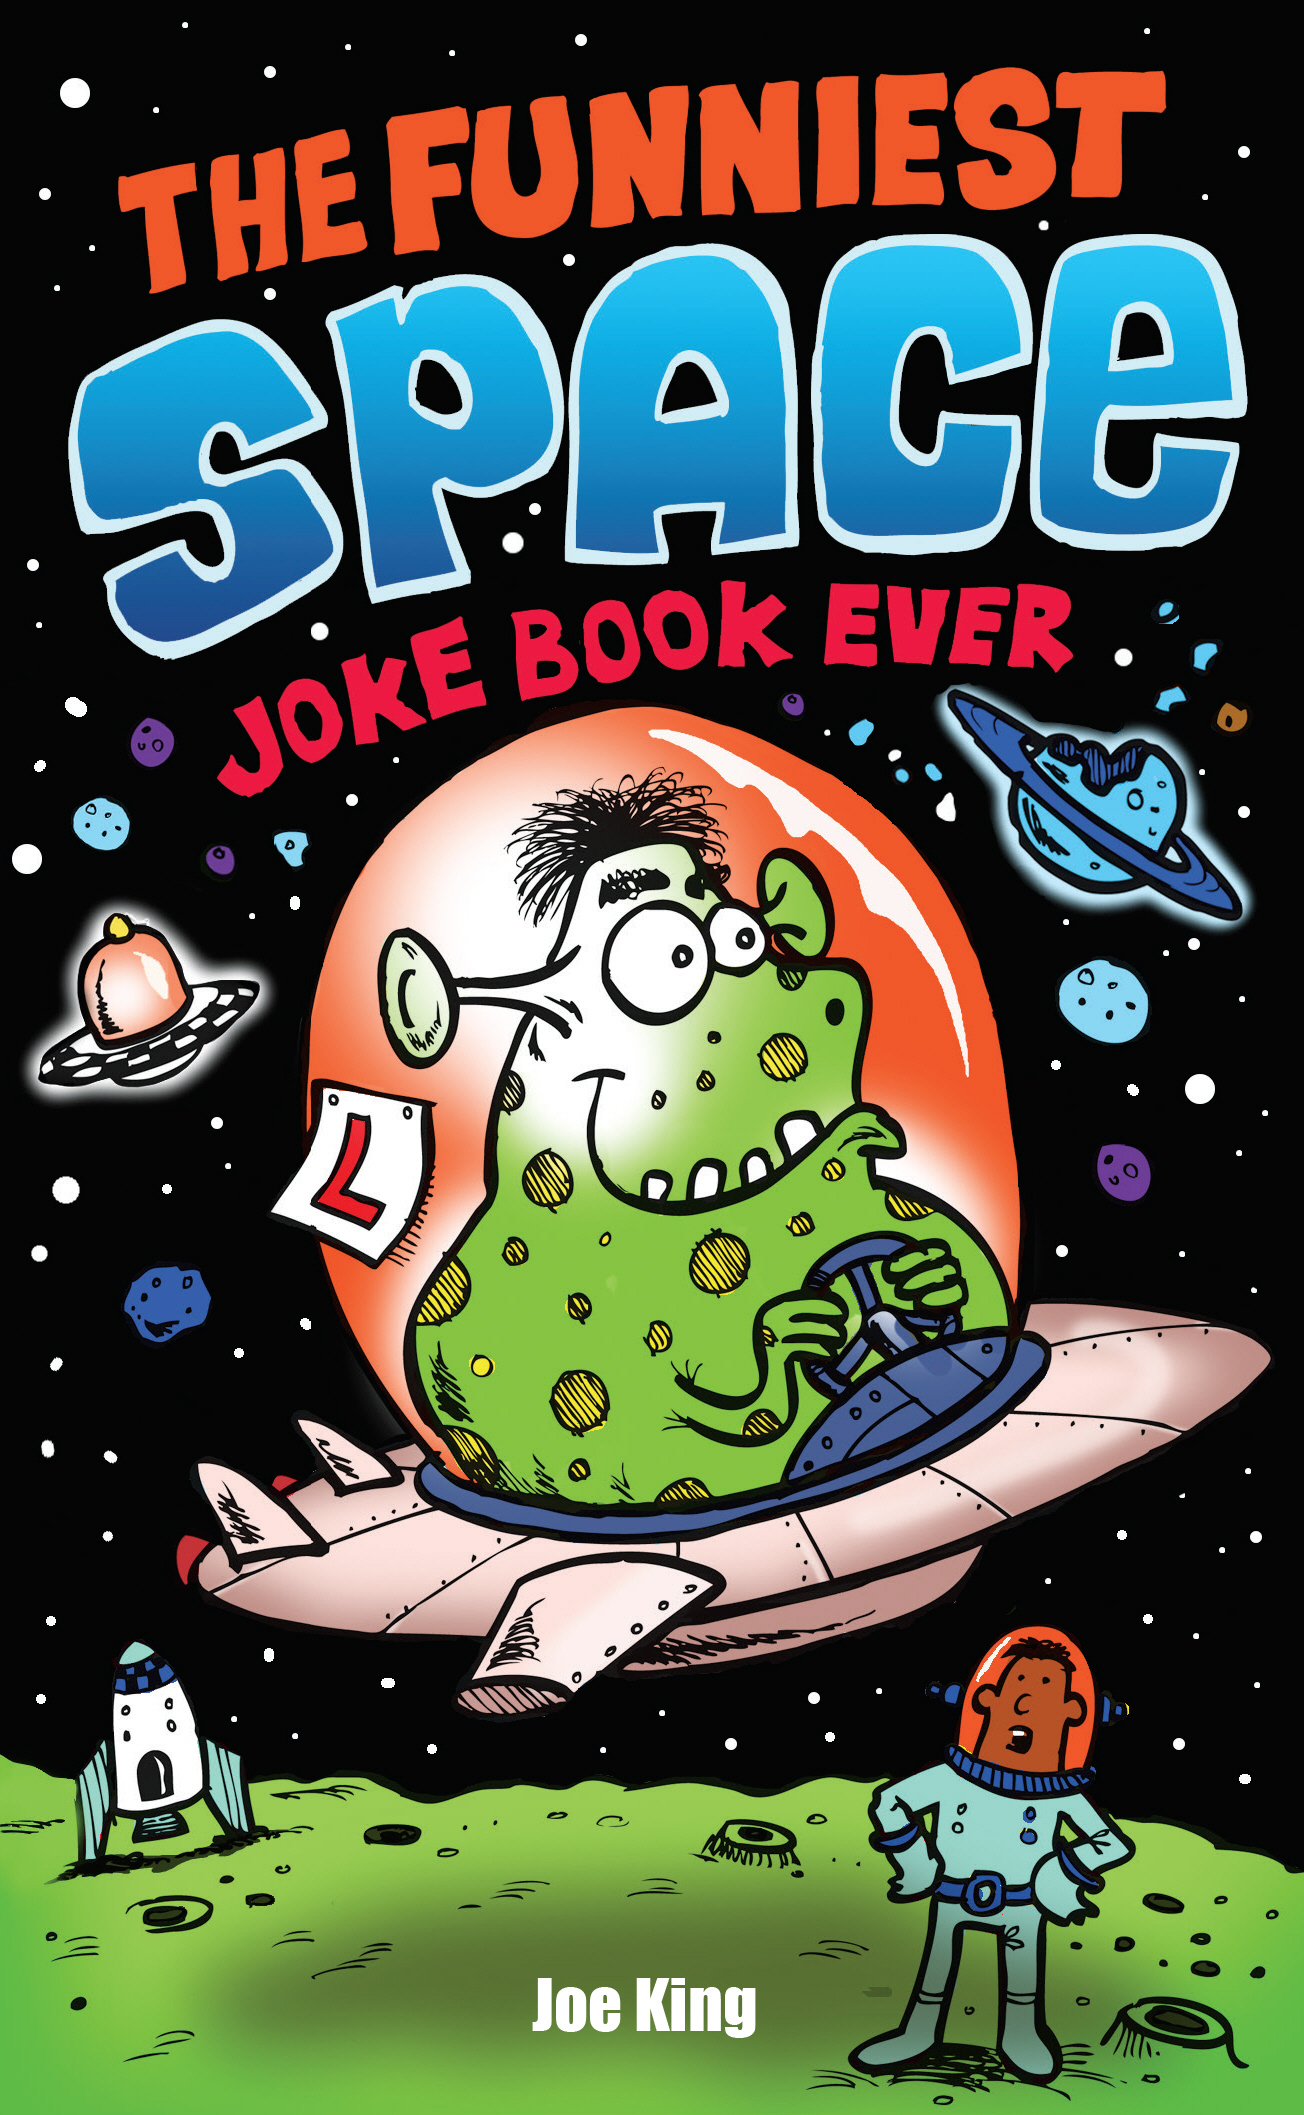 The Funniest Space Joke Book Ever